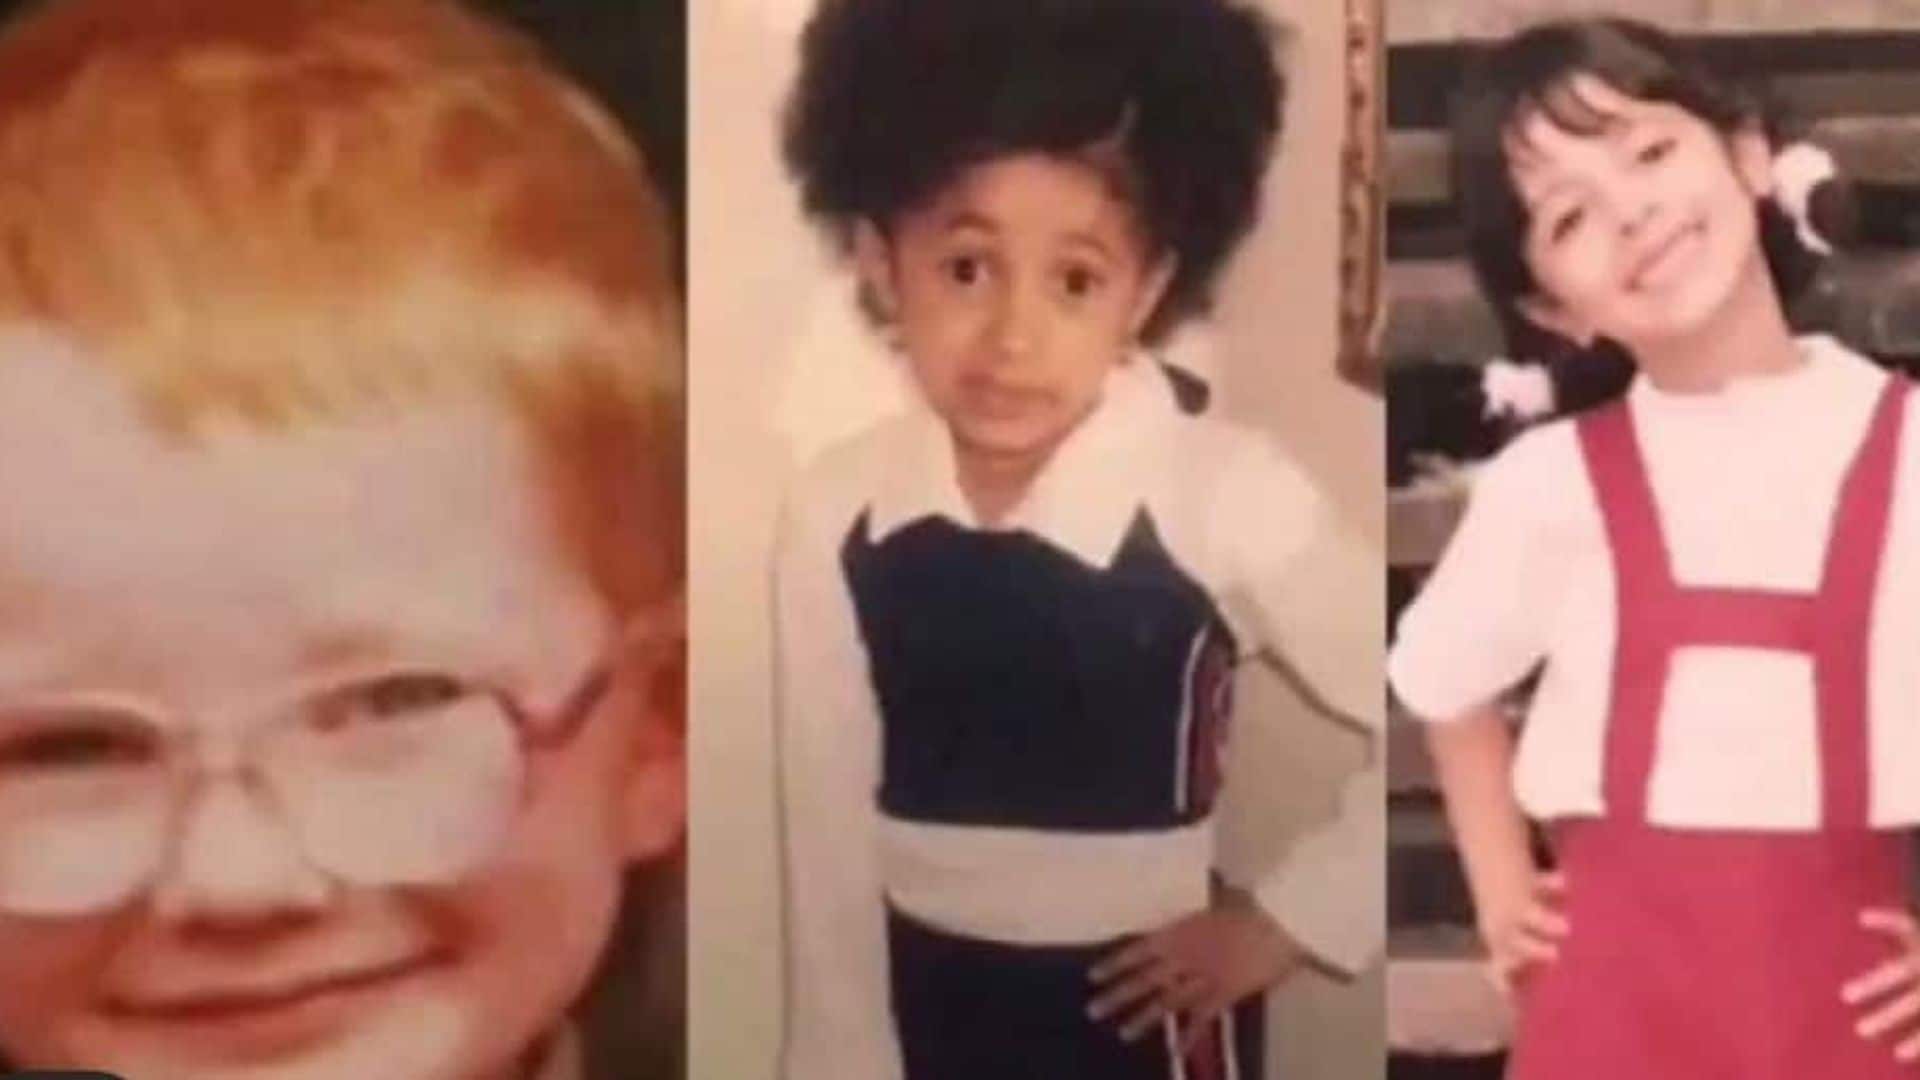 Cardi B shares hilarious throwback pics of these hit artists - can you guess who they are?